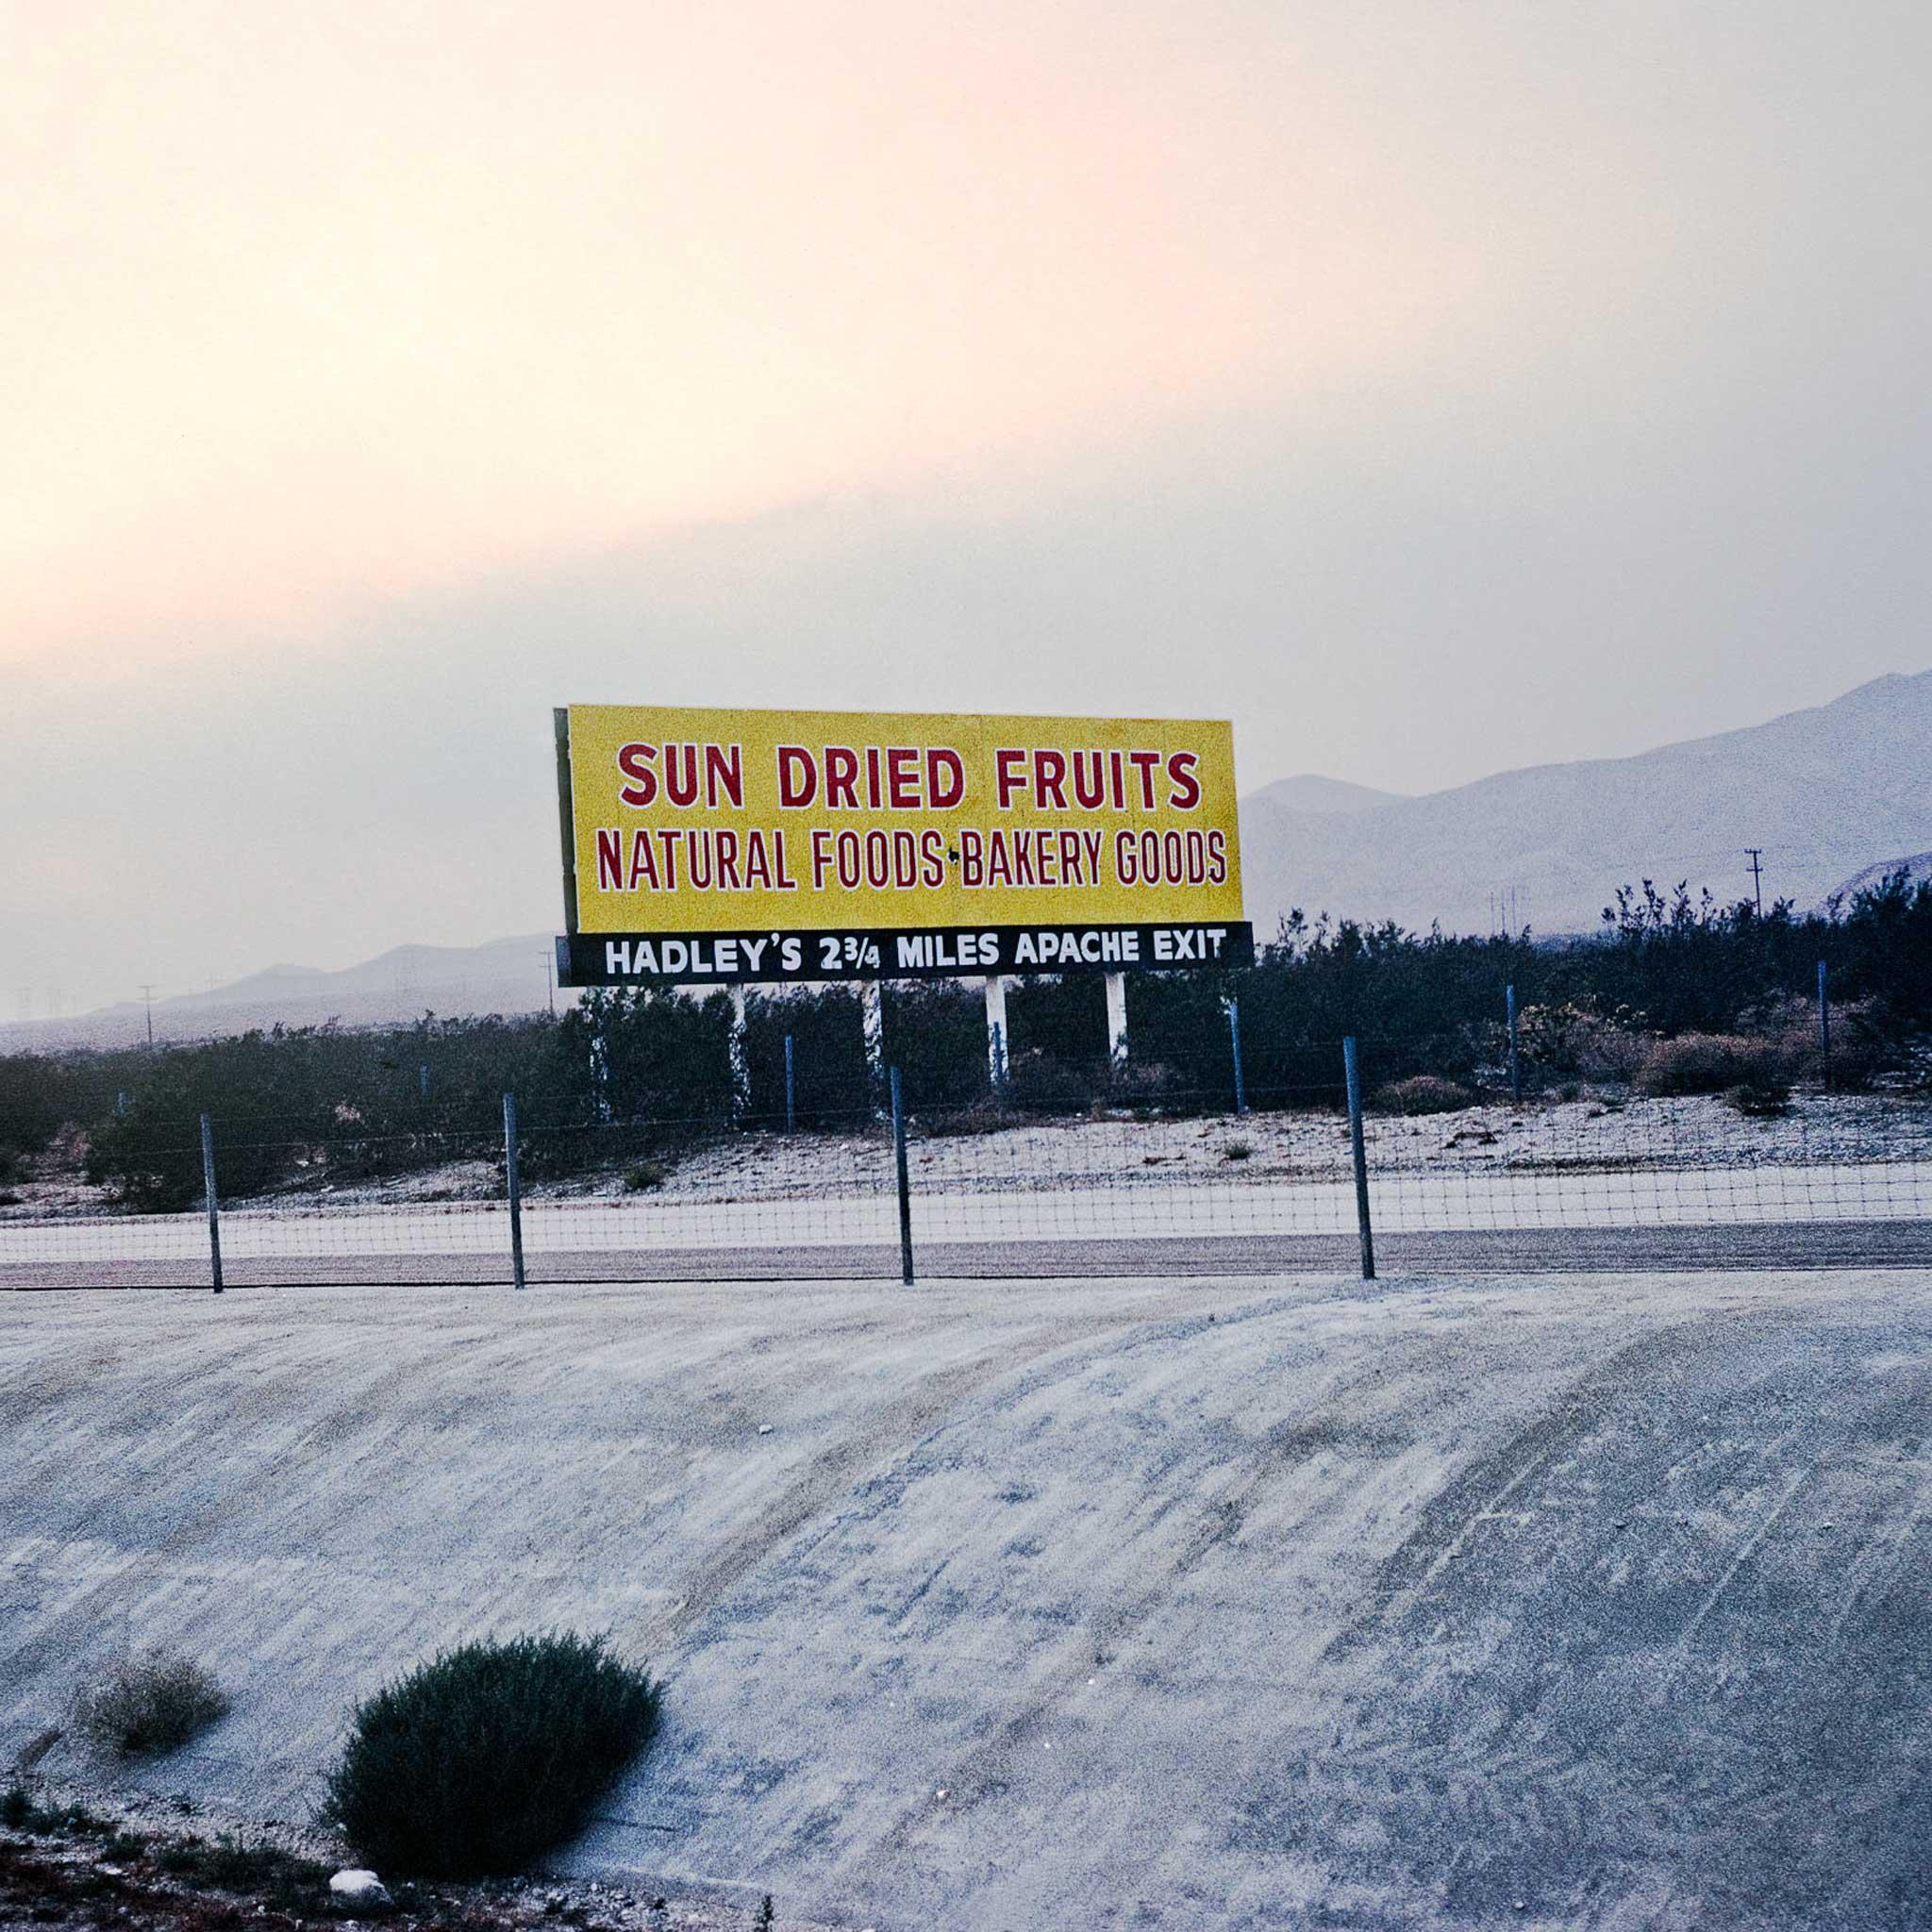 A sign that says "Sun Dried Fruits" above a concrete culvert